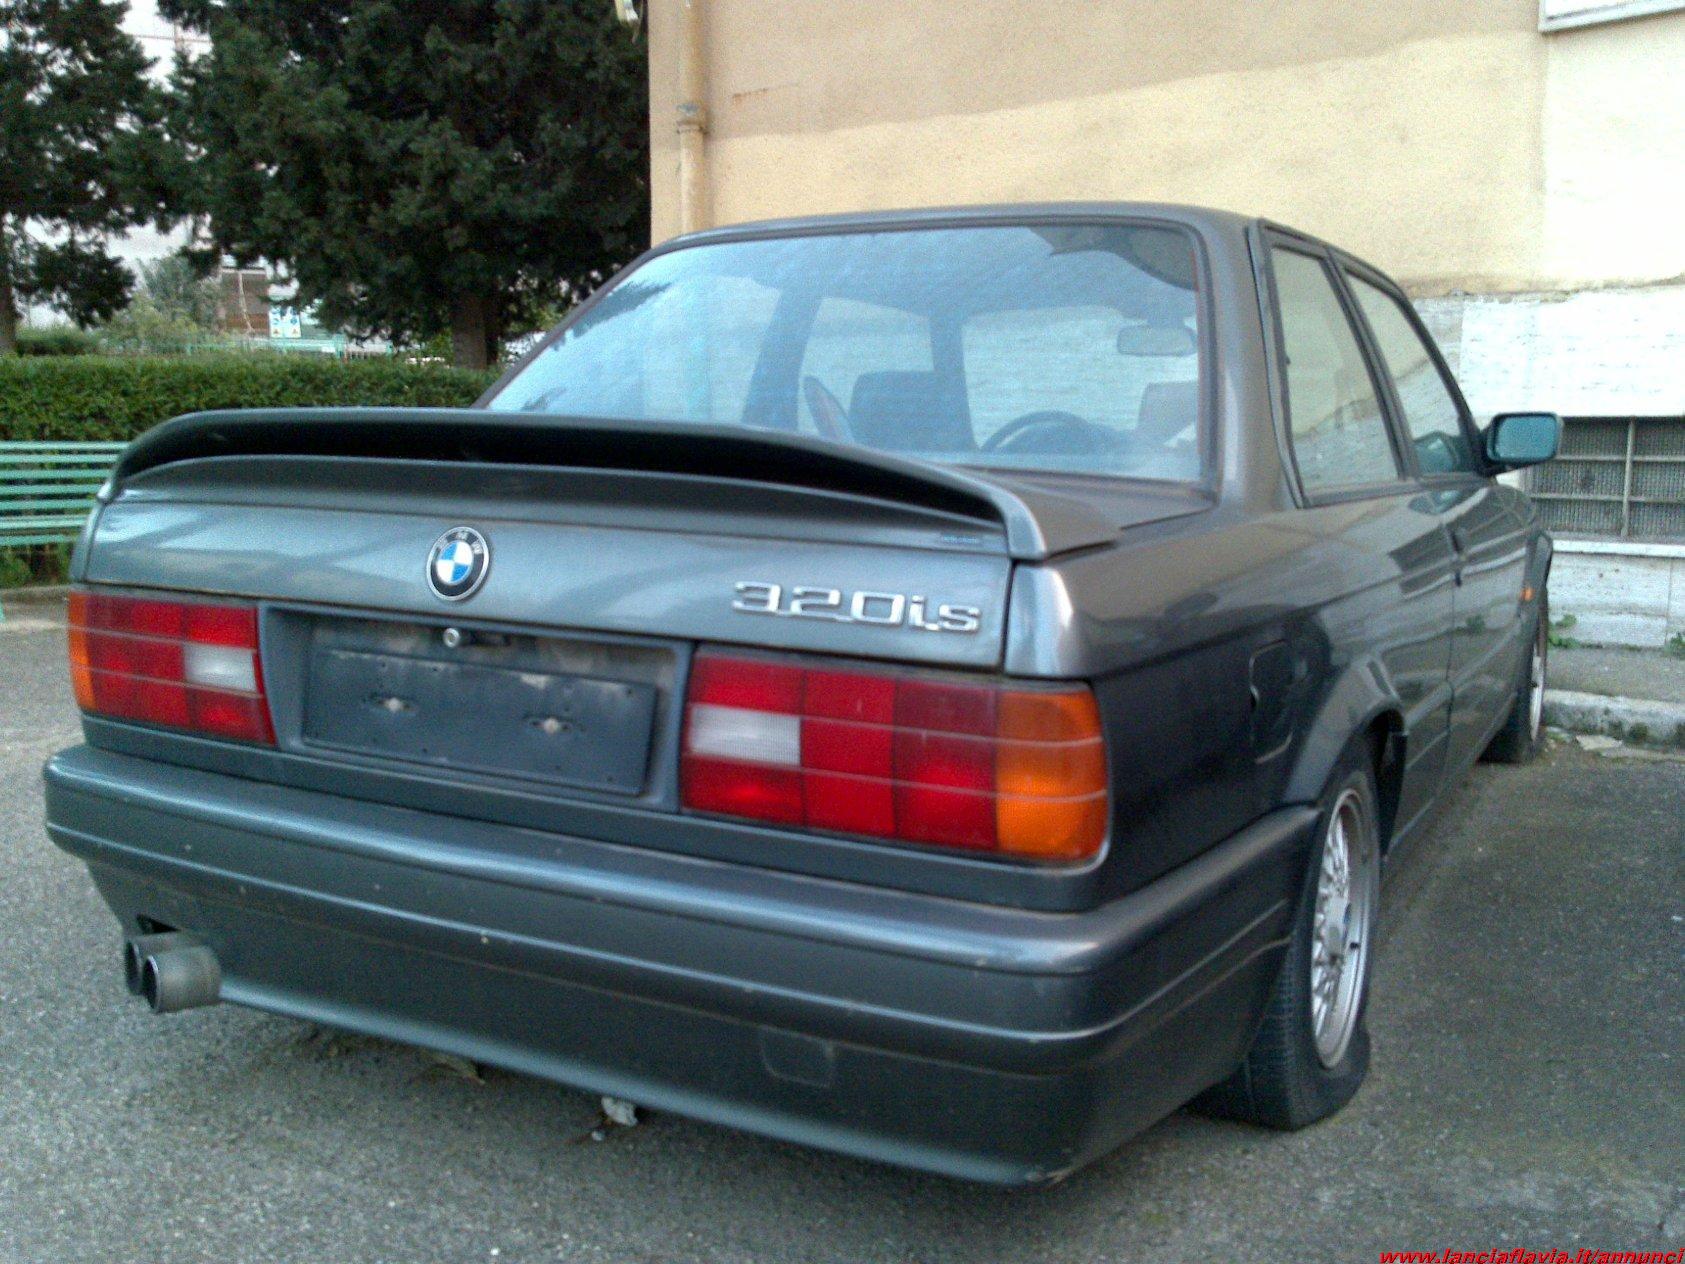 Bmw 320is e30 specs #1